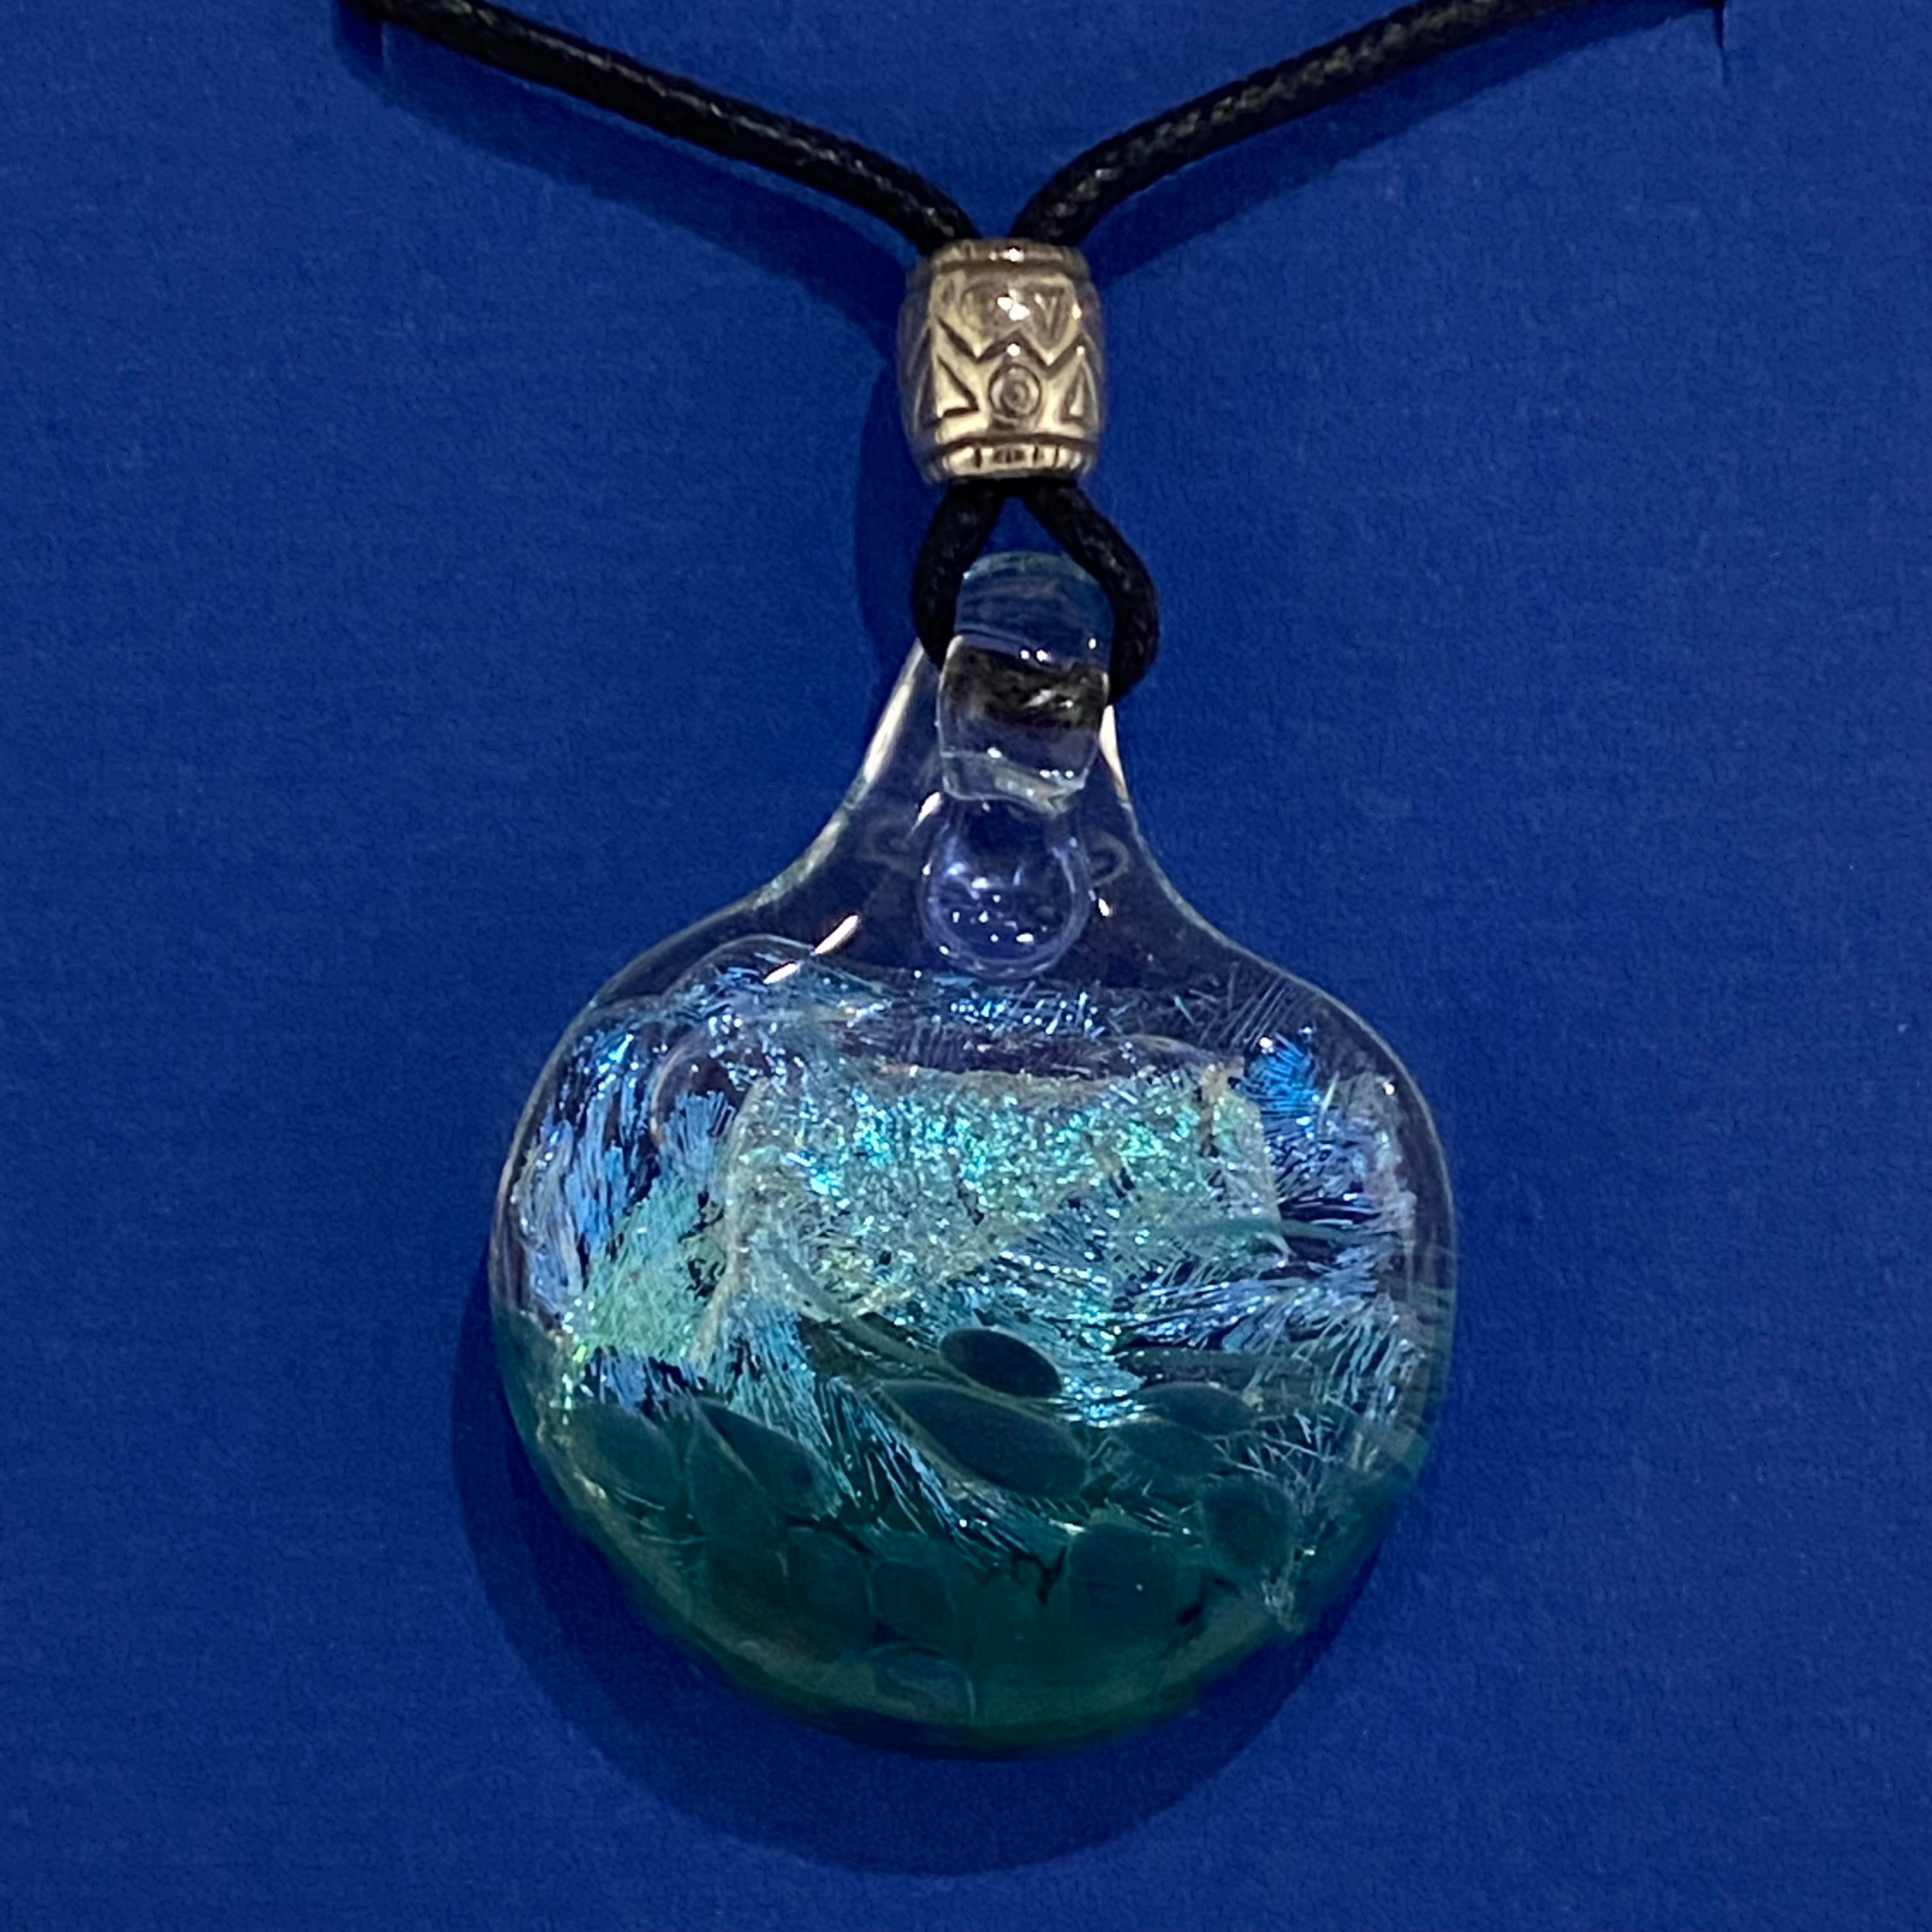 Hand Blown Art Glass Pendants For Necklaces. Pretty Collection. Lot 6 | eBay